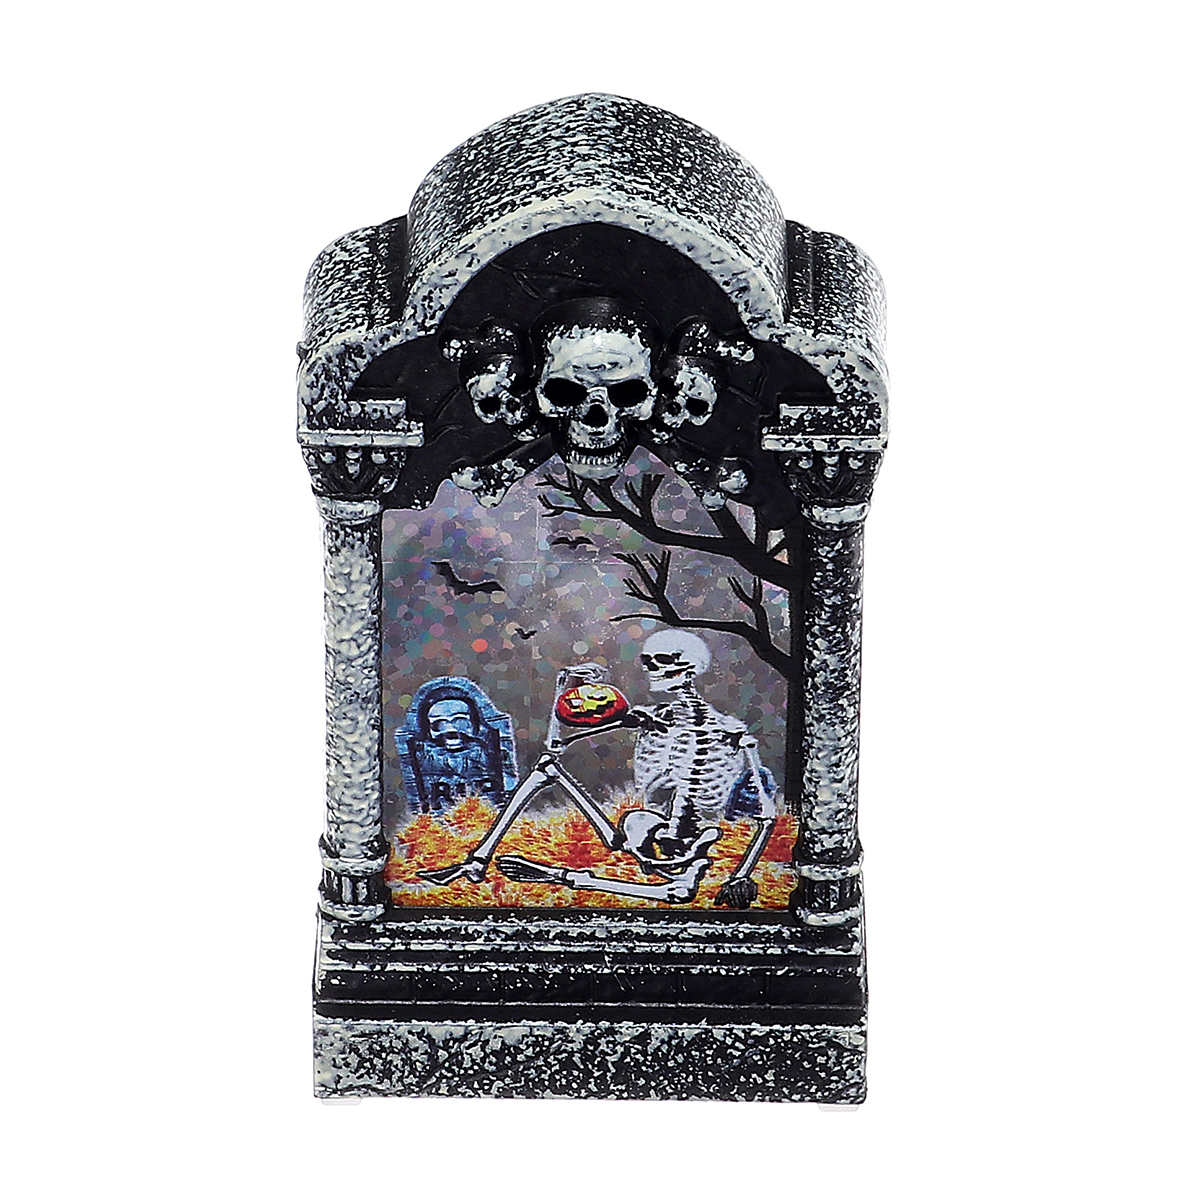 Halloween-LED-Light-Lamp-Skeleton-Tombstone-Castle-Plastic-Prop-Party-Gift-Decor-Table-Lamp-1638136-7